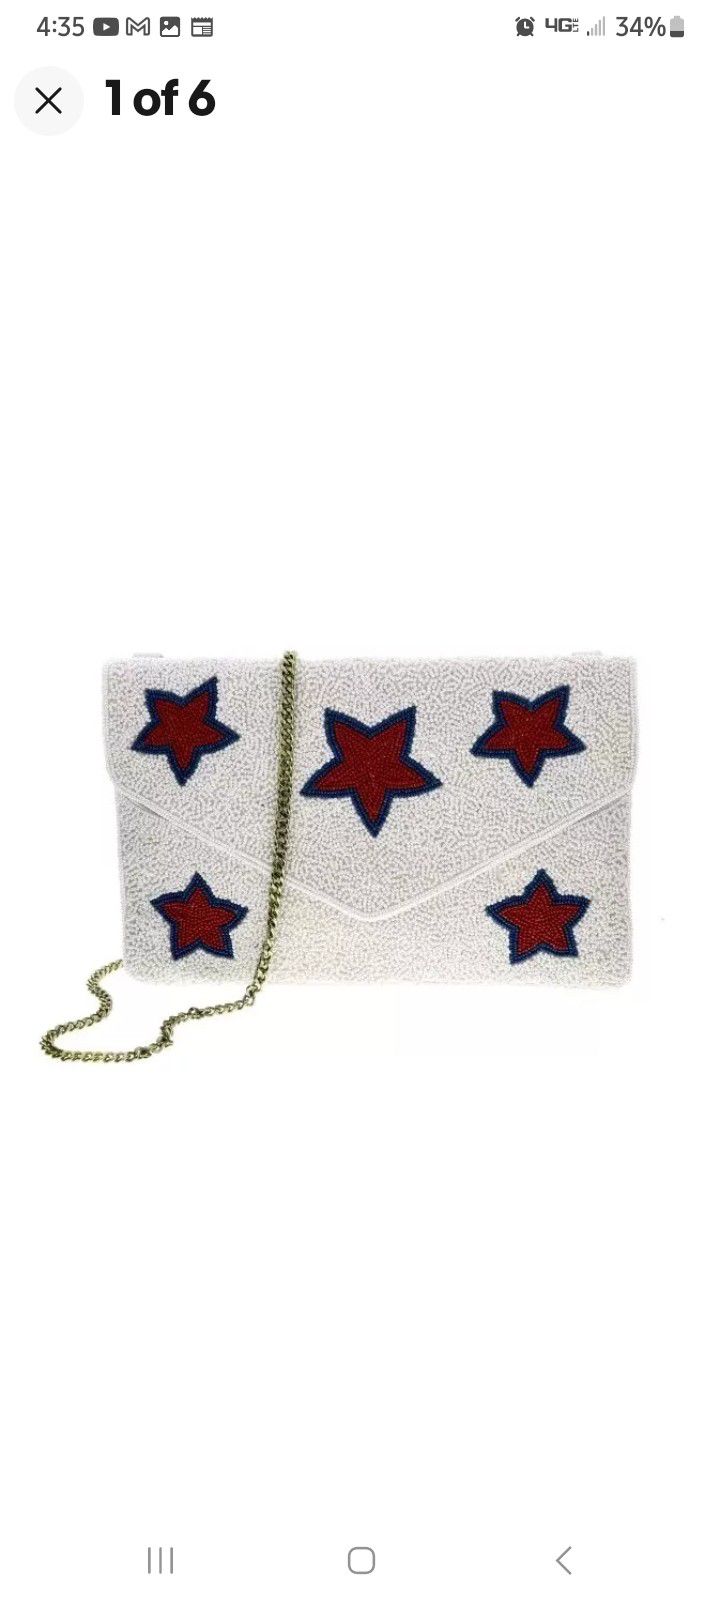 Jane Marie "Party In The Usa" Clutch Purse